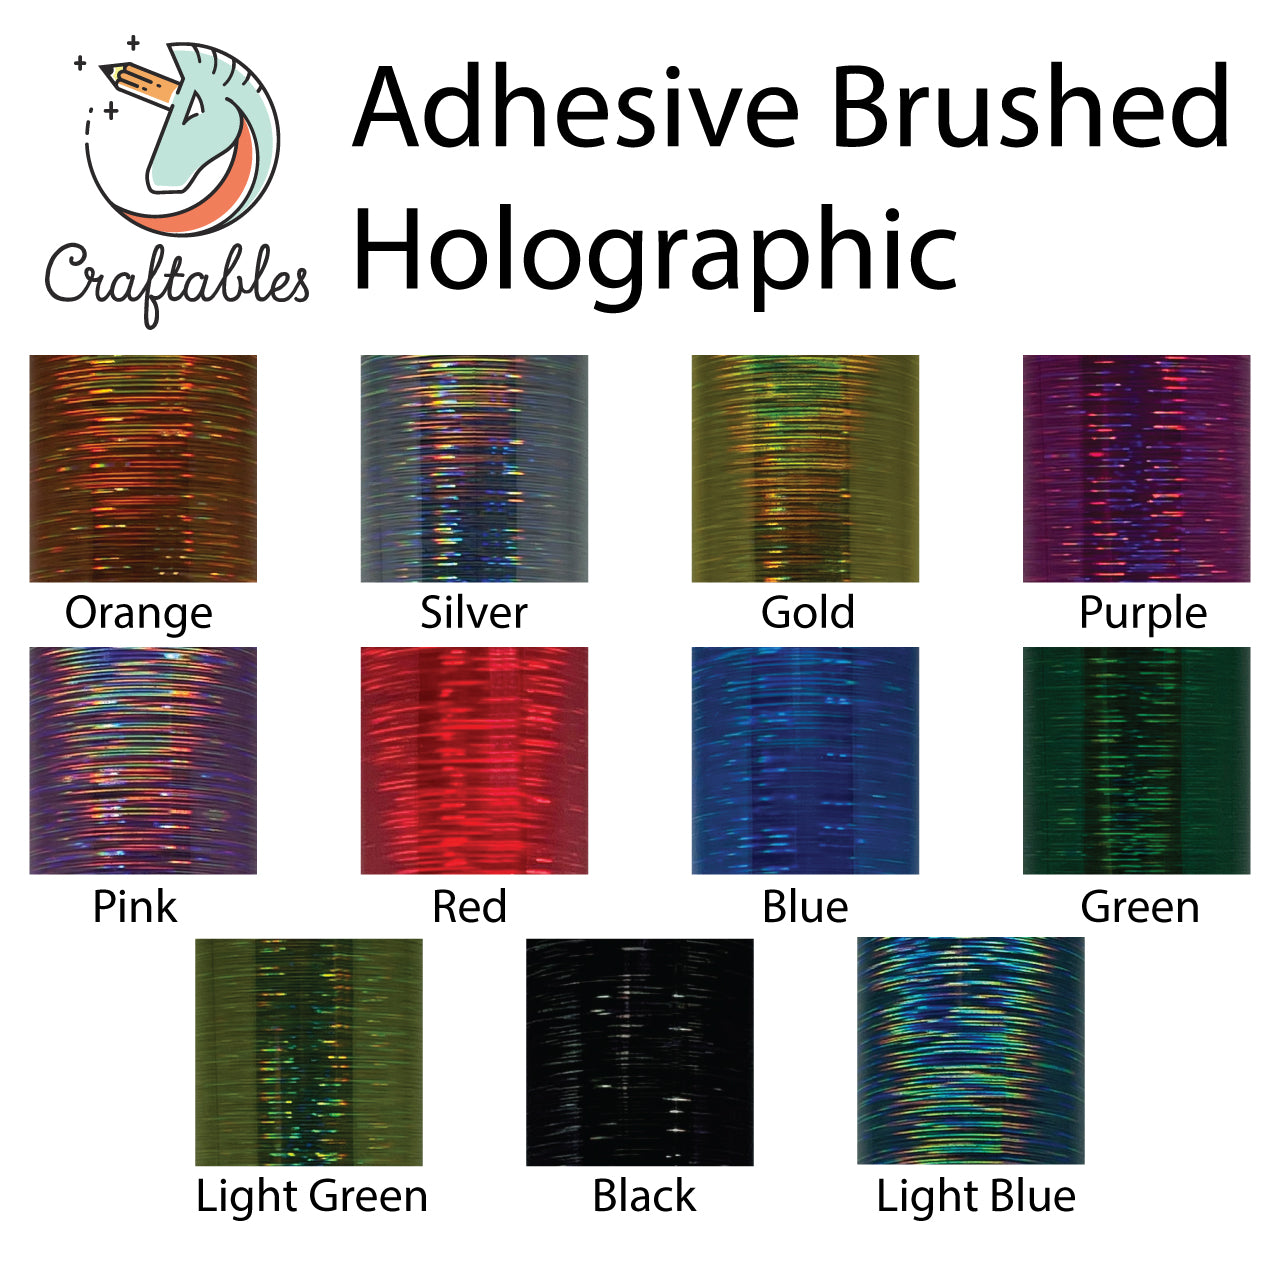 Red Brushed Holographic Adhesive Vinyl Rolls By Craftables – shopcraftables